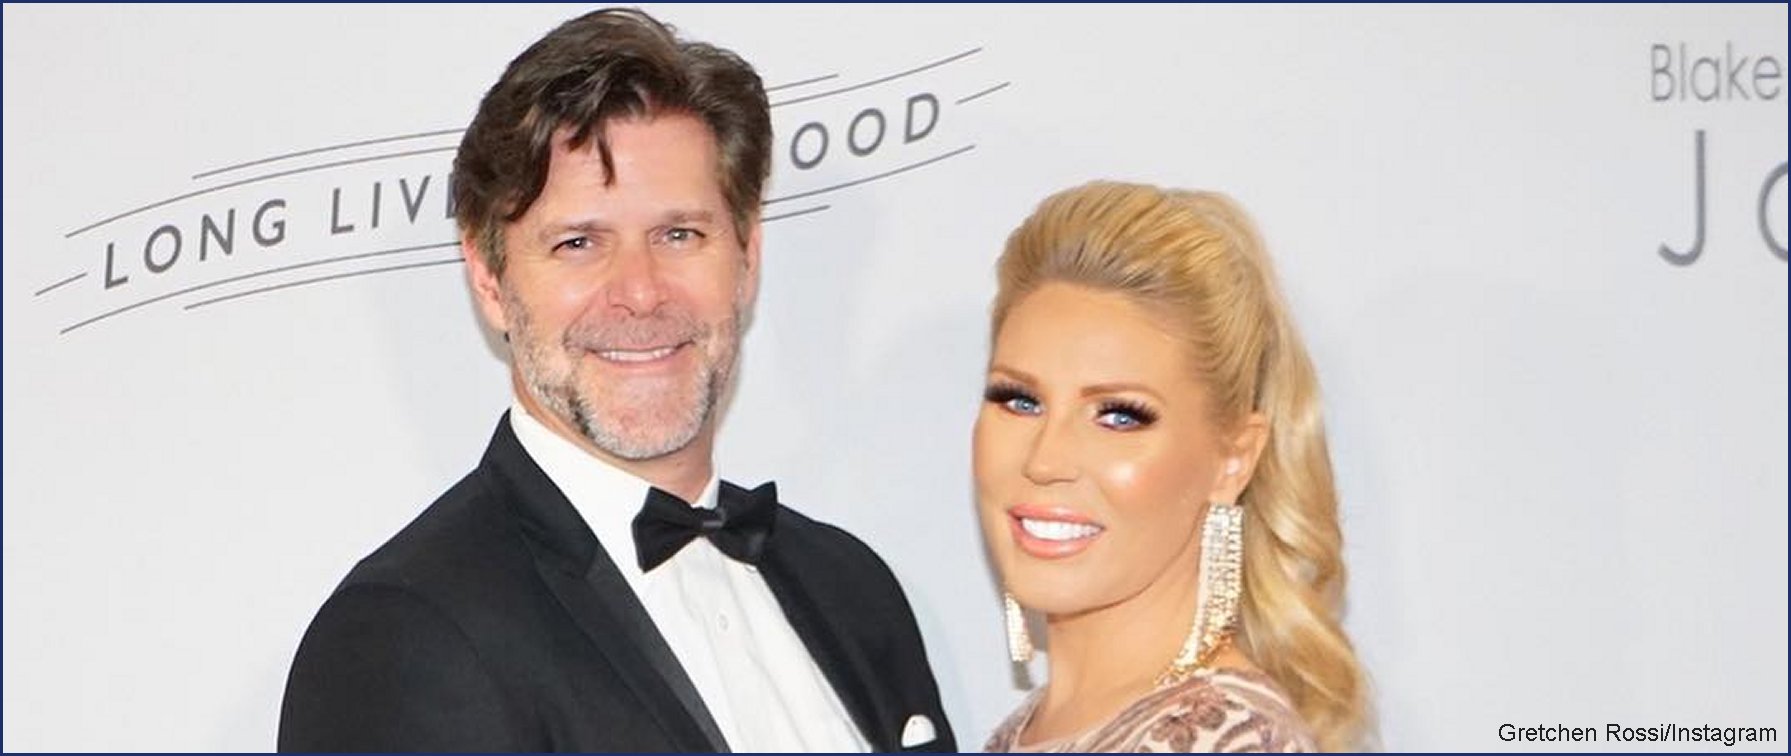 The Real Housewives alum Gretchen Rossi and fiance Slade Smiley expecting baby girl photo